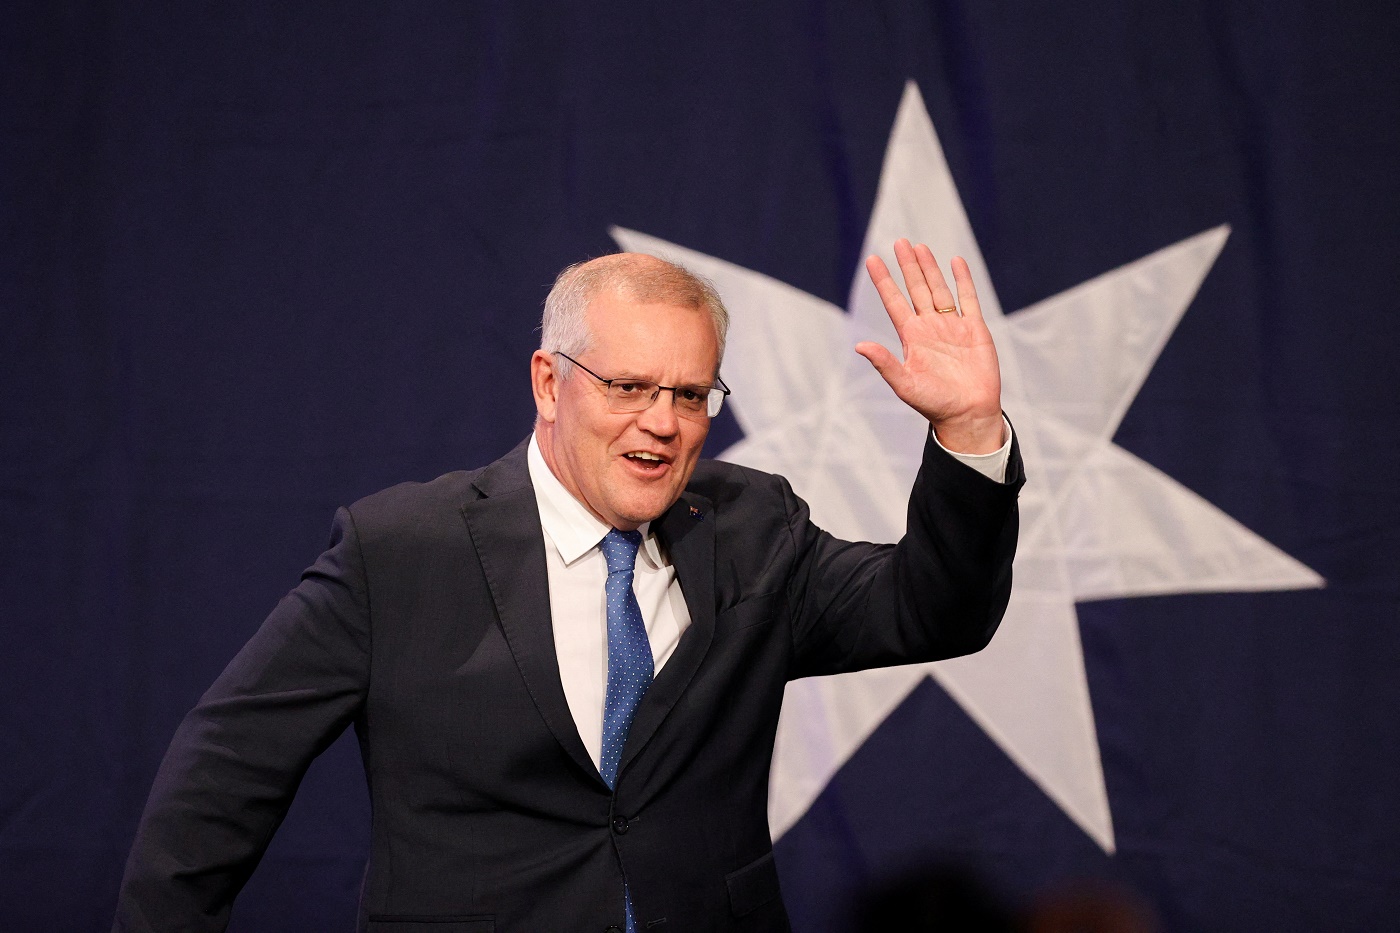 Australian PM Scott Morrison concedes election defeat, ends nearly a decade of conservative rule